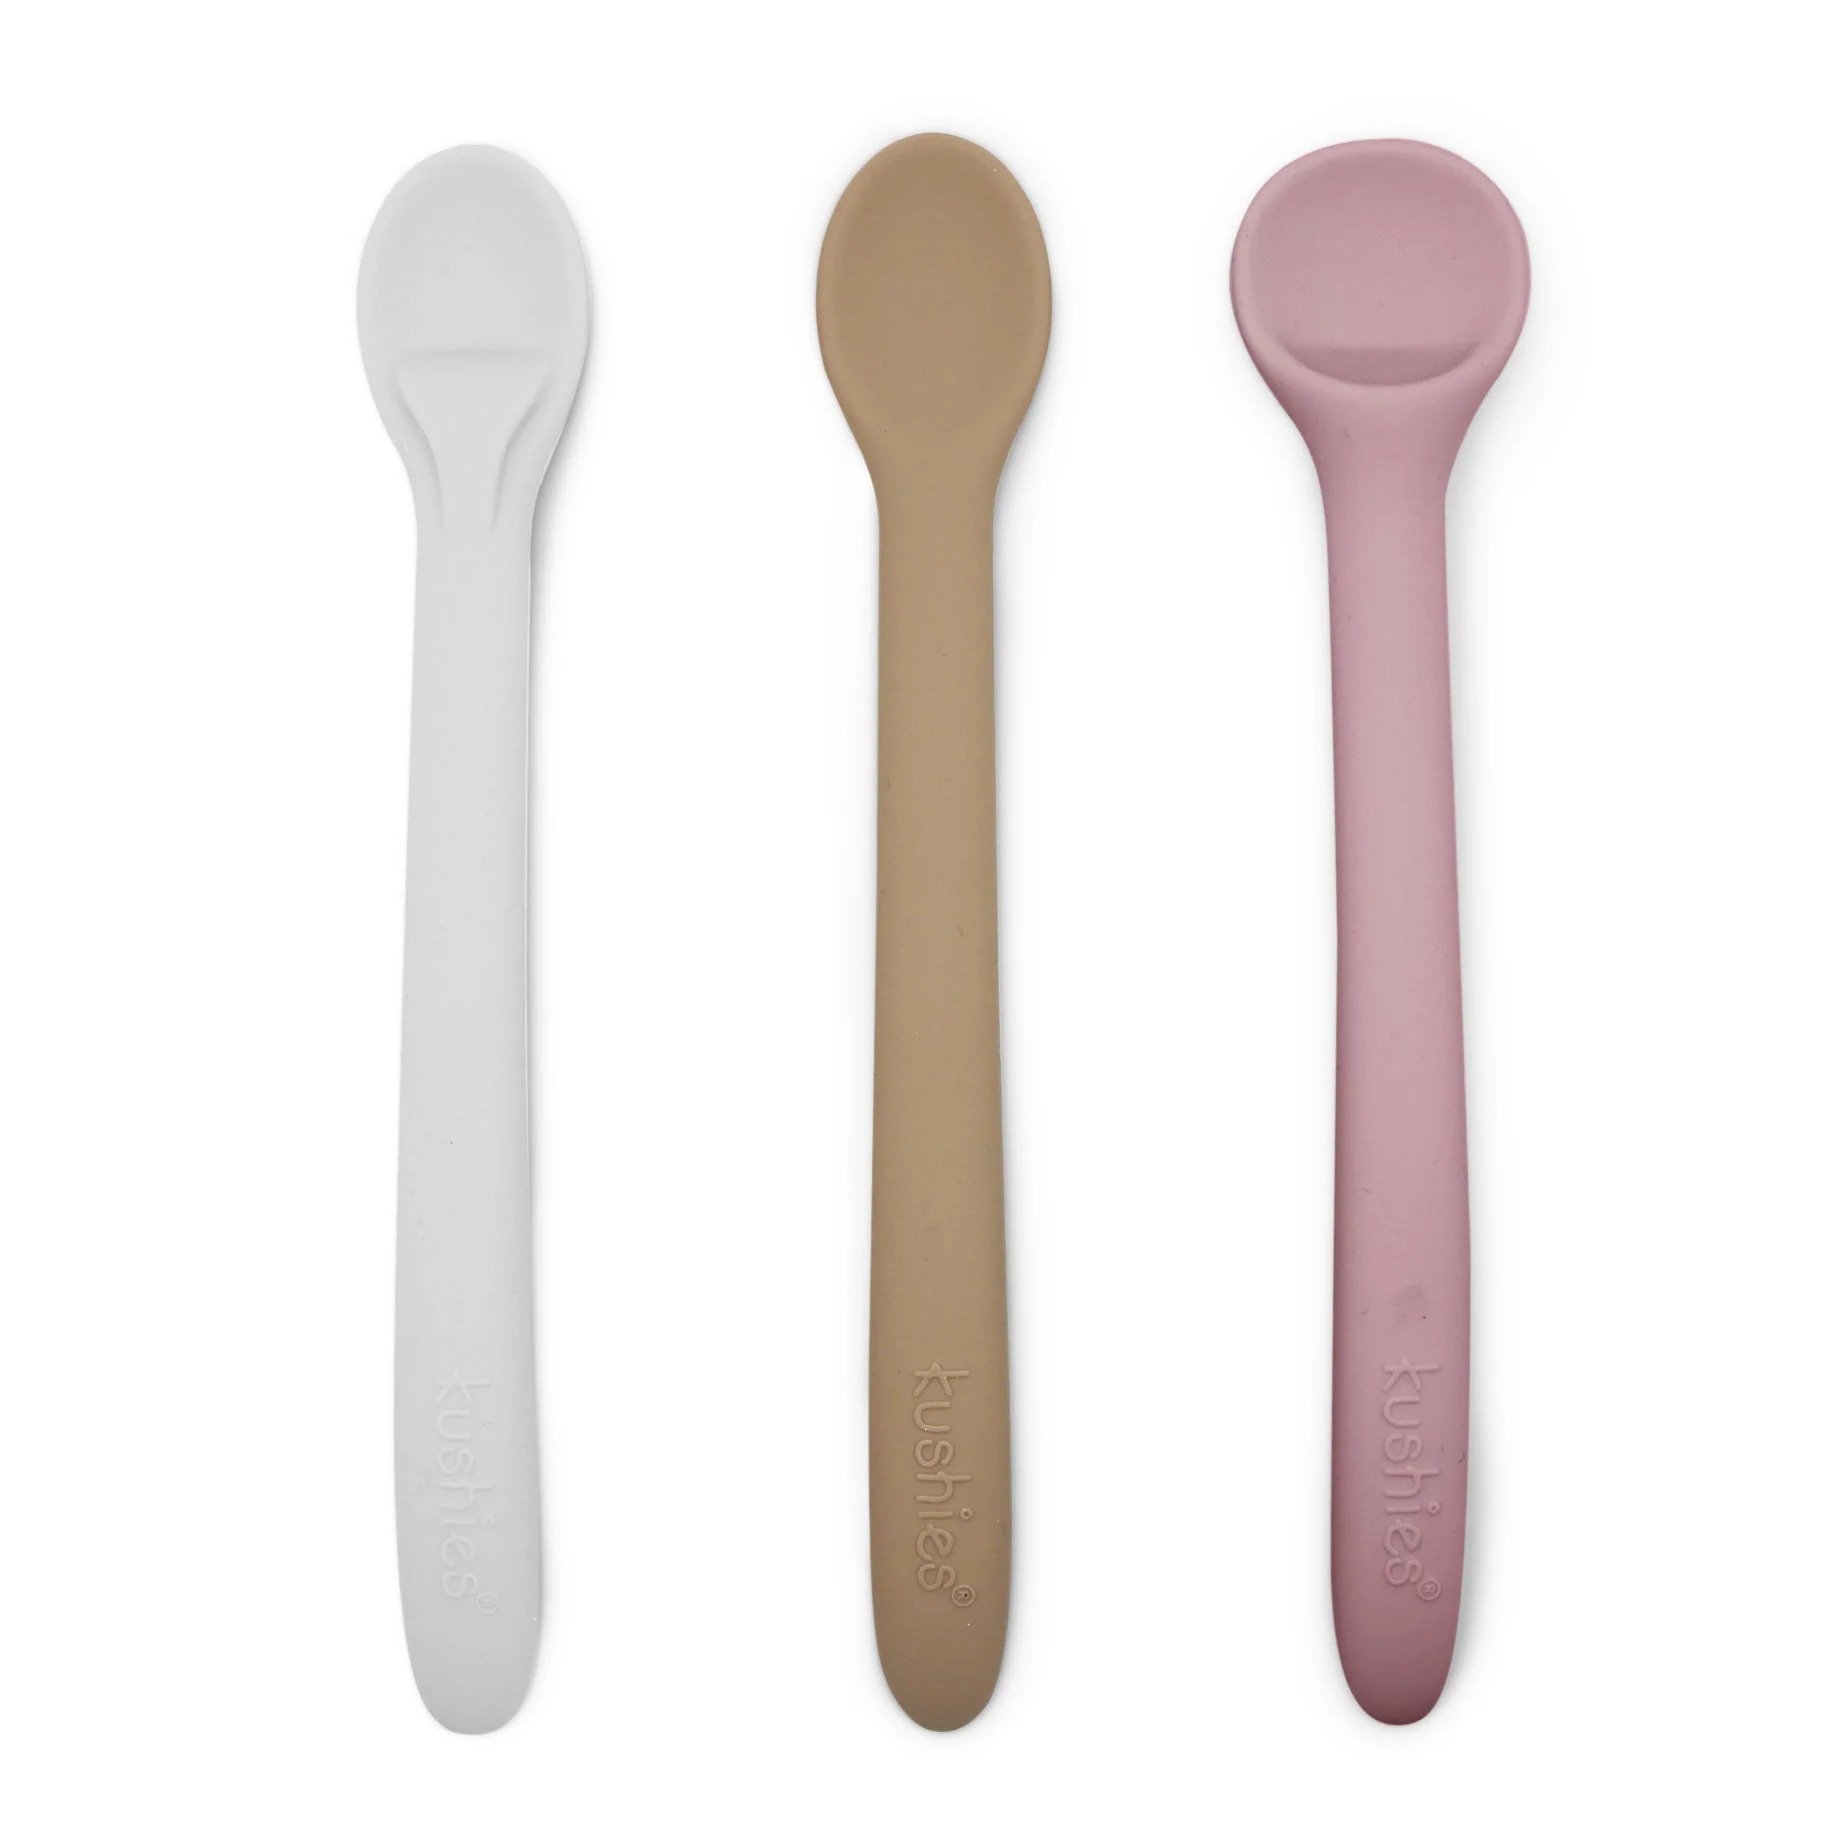 Mushie Silicone Feeding Spoons (2-Pack) Cambridge Blue/Shifting Sand